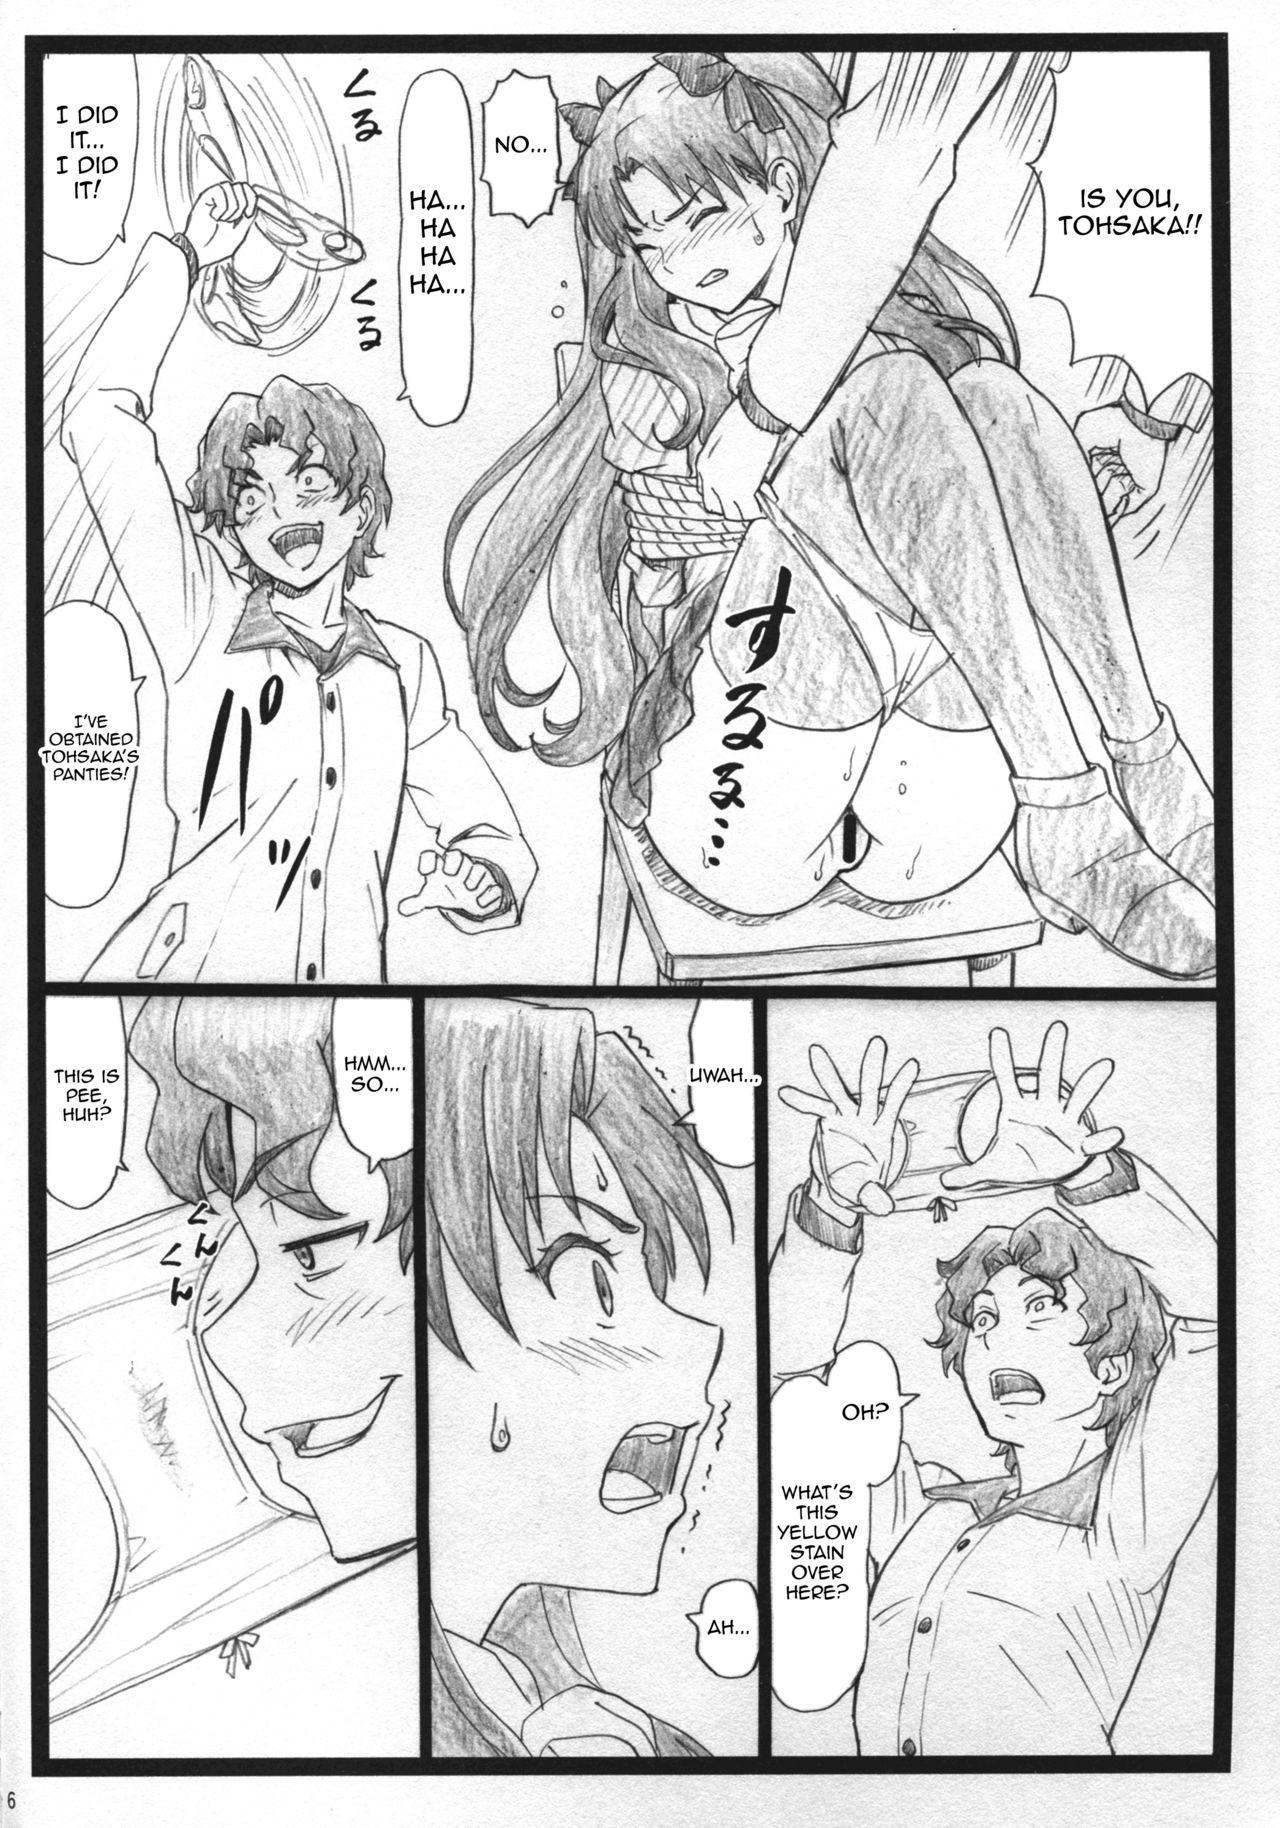 Step Sister Rin to Shite... | With Rin... - Fate stay night Big Butt - Page 6